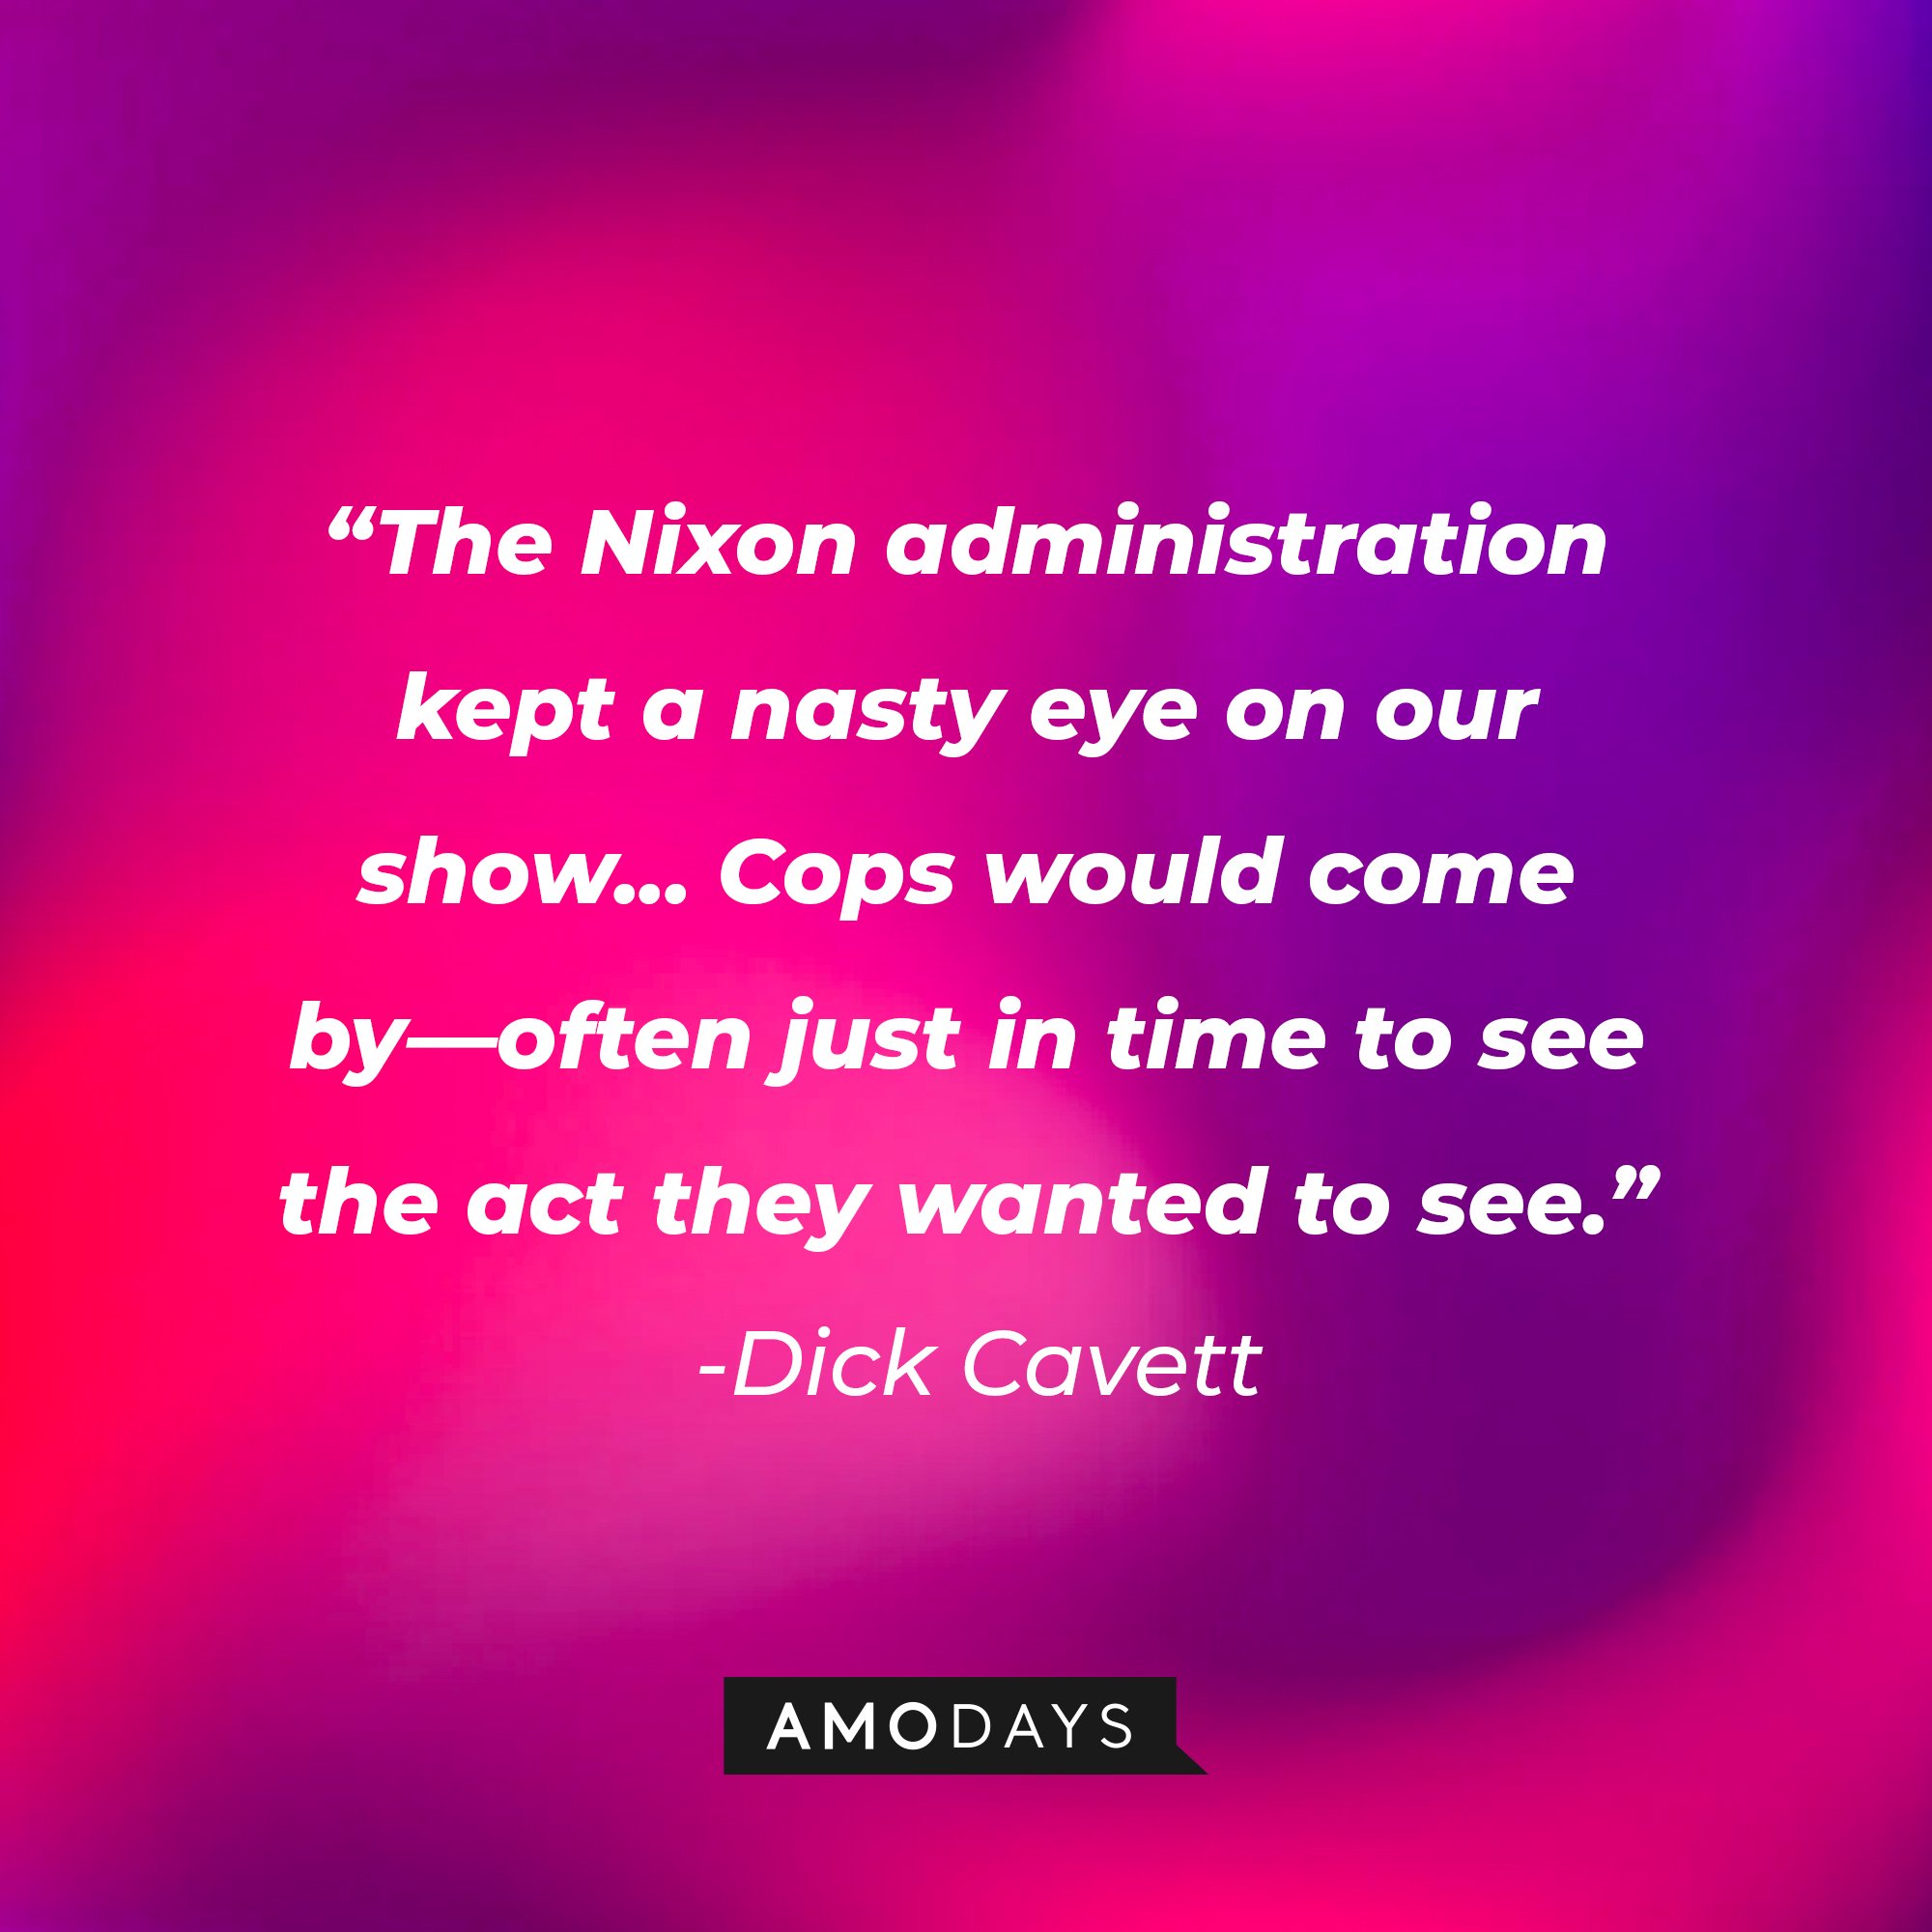 Dick Cavett’s quote: "The Nixon administration kept a nasty eye on our show... Cops would come by—often just in time to see the act they wanted to see." | Image: AmoDays 